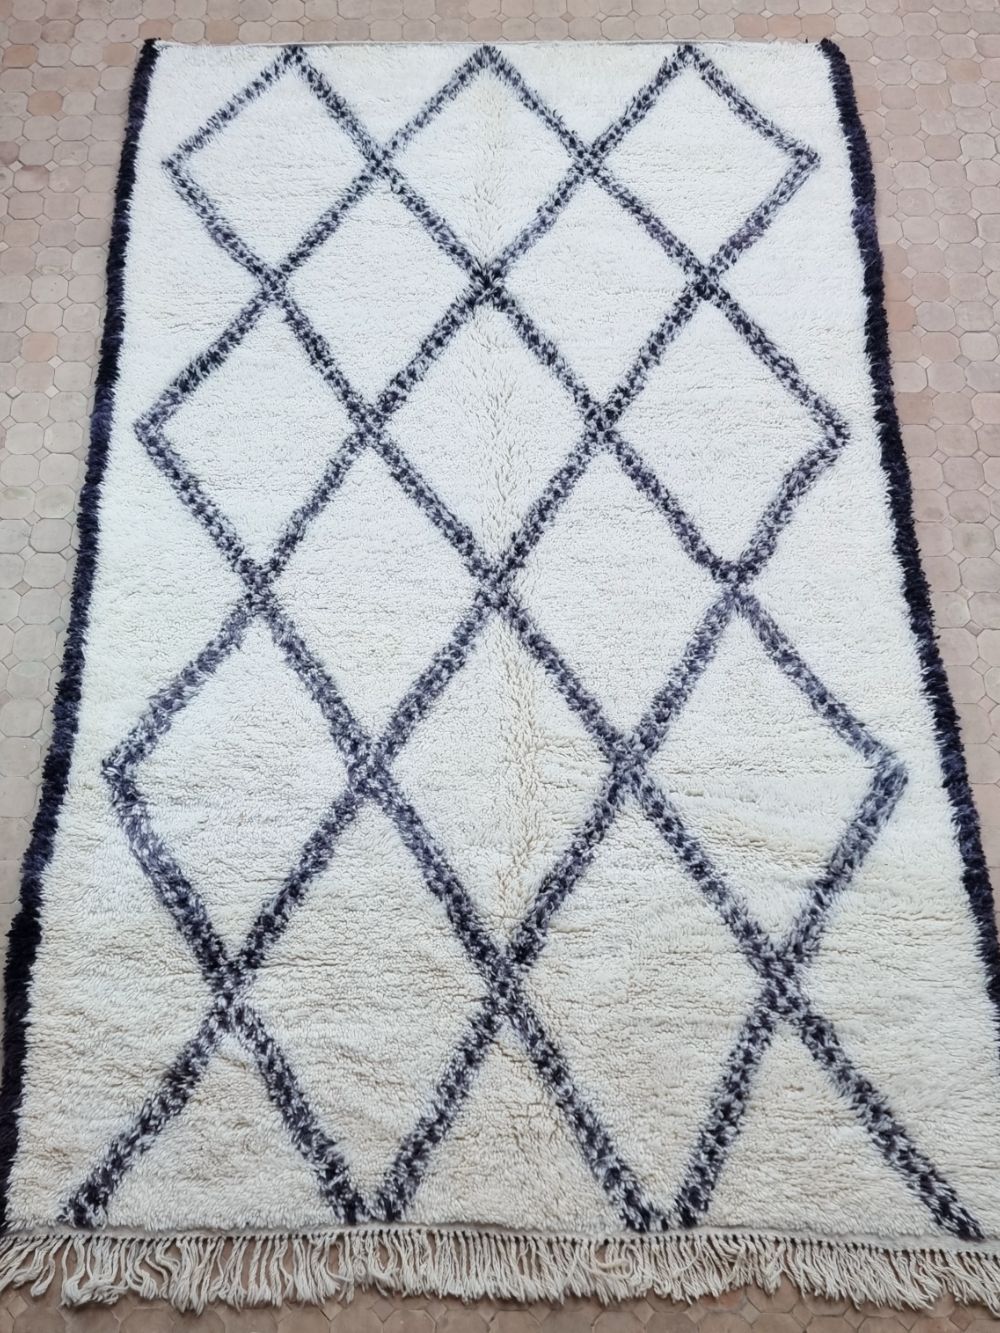 Order by Size: Moroccan Marmoucha Rug